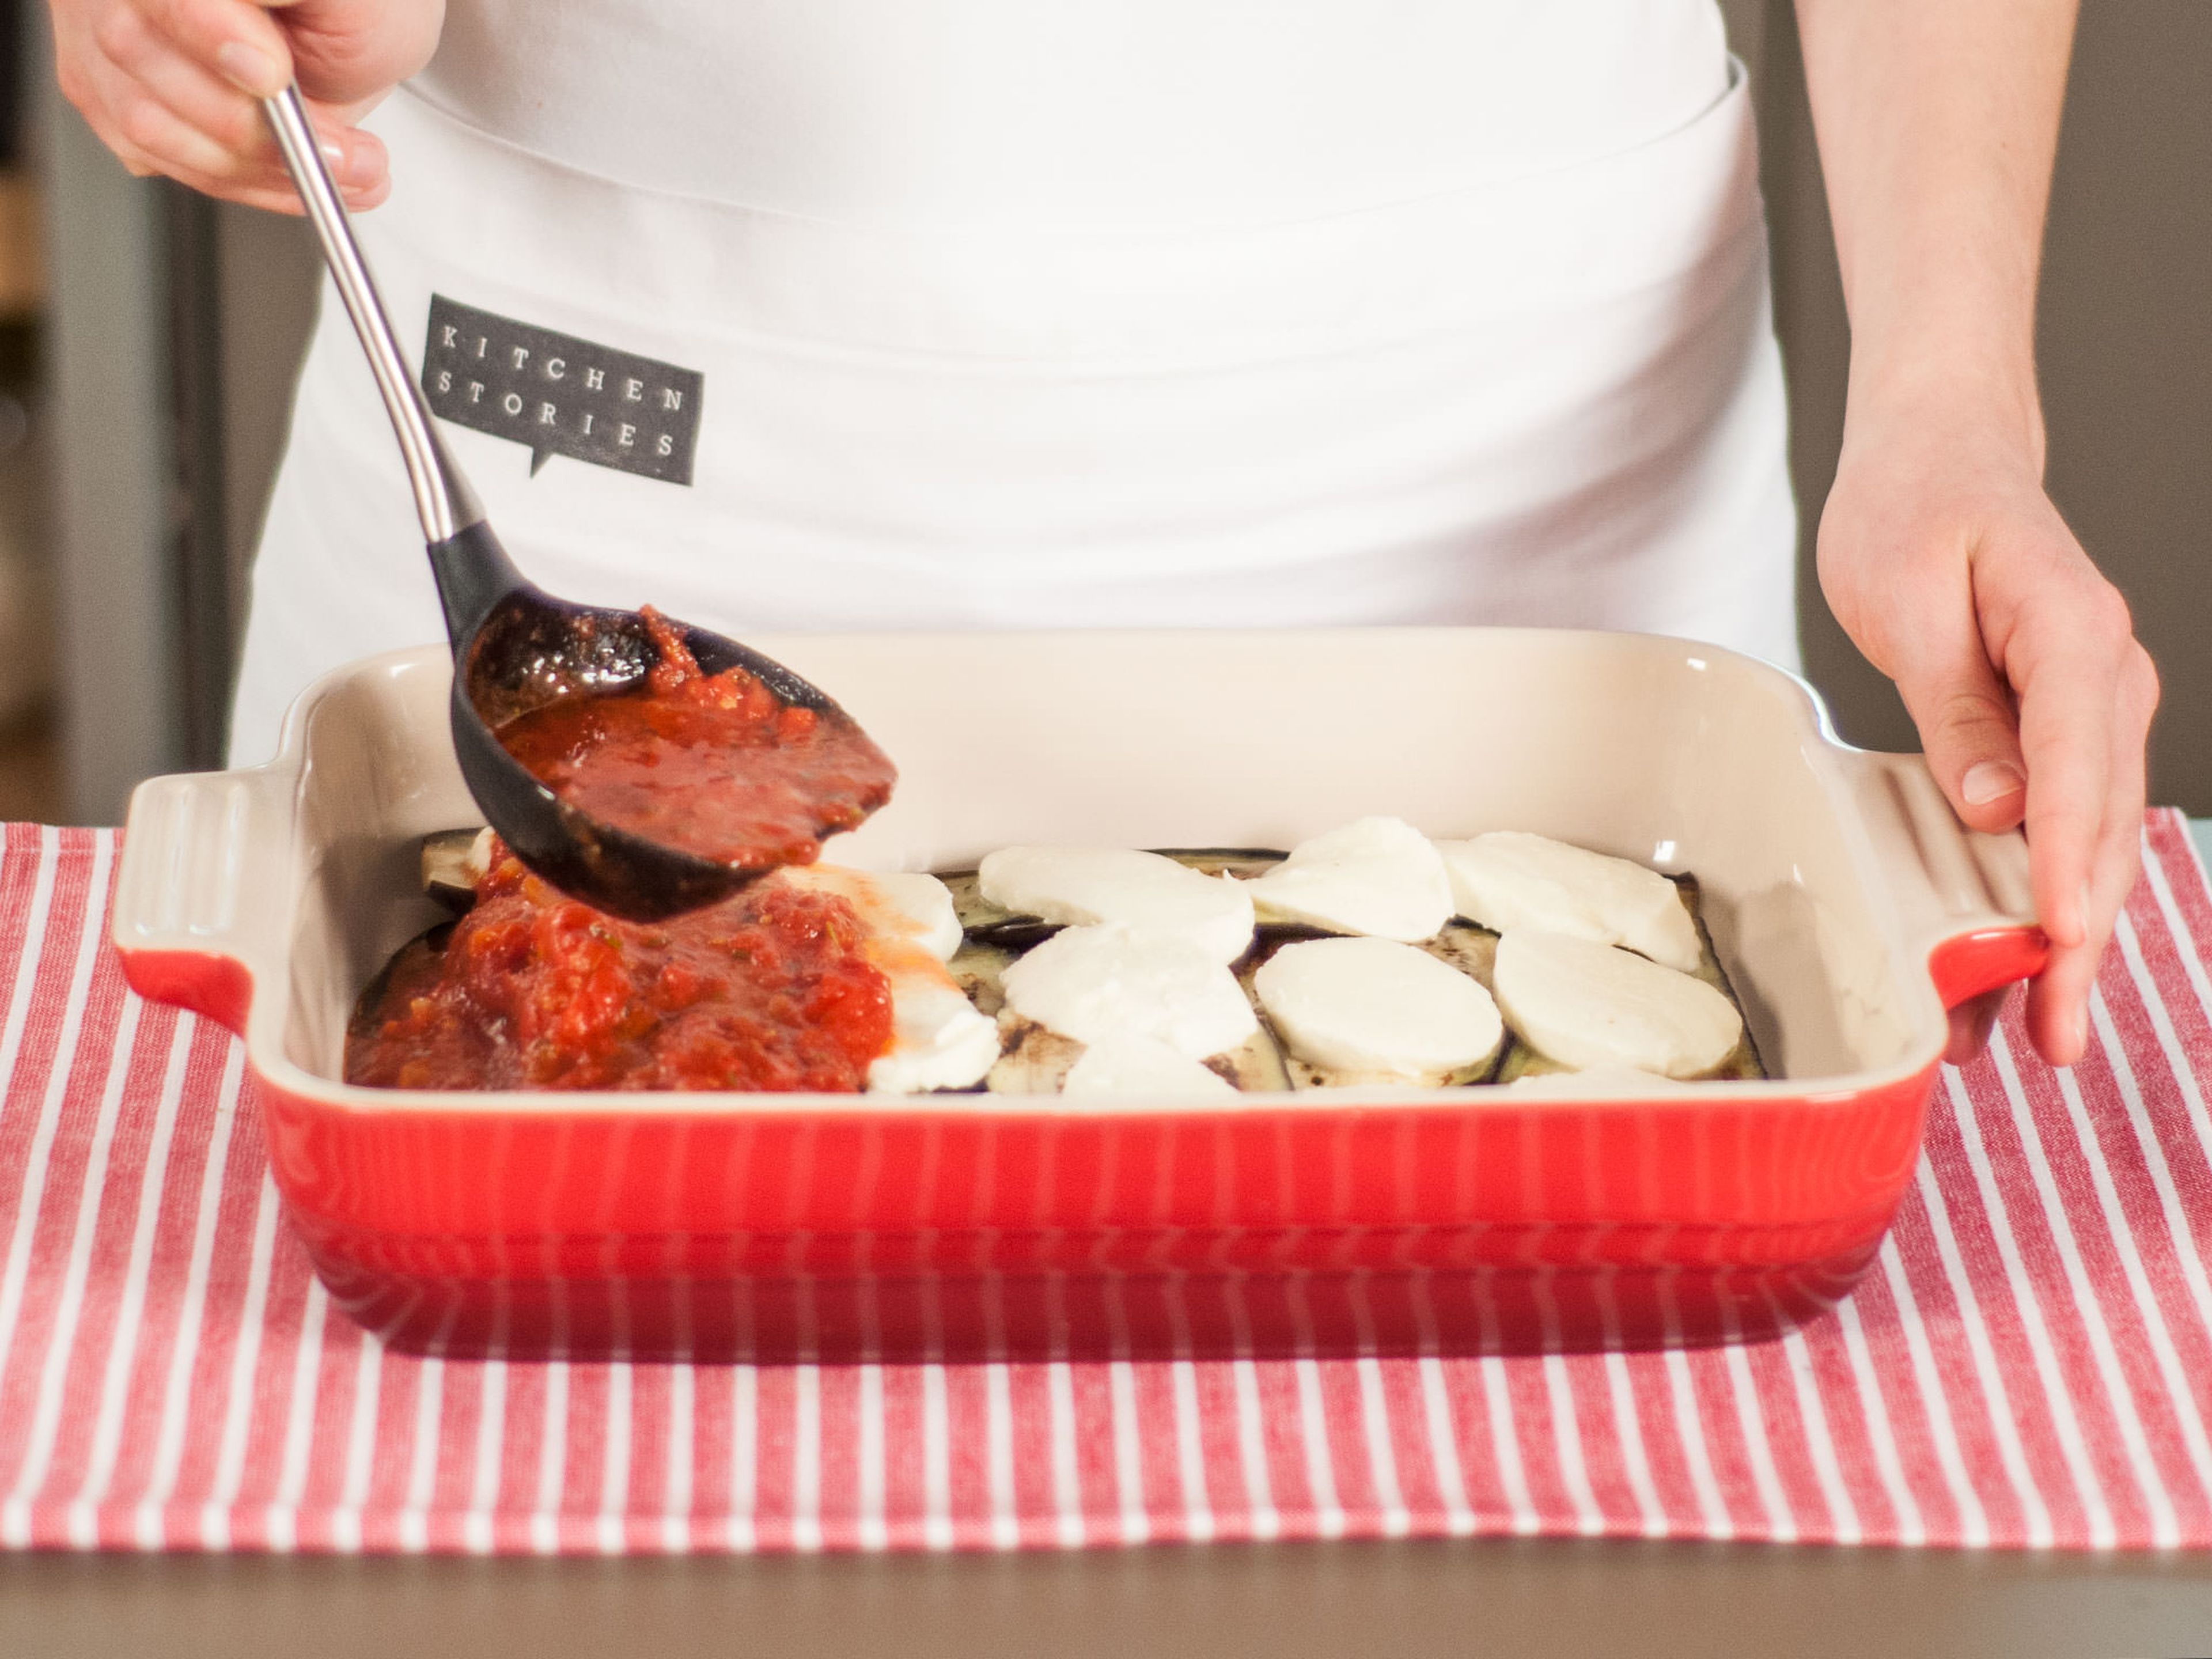 In a baking dish, create two separate layers of eggplant, mozzarella, and tomato sauce.